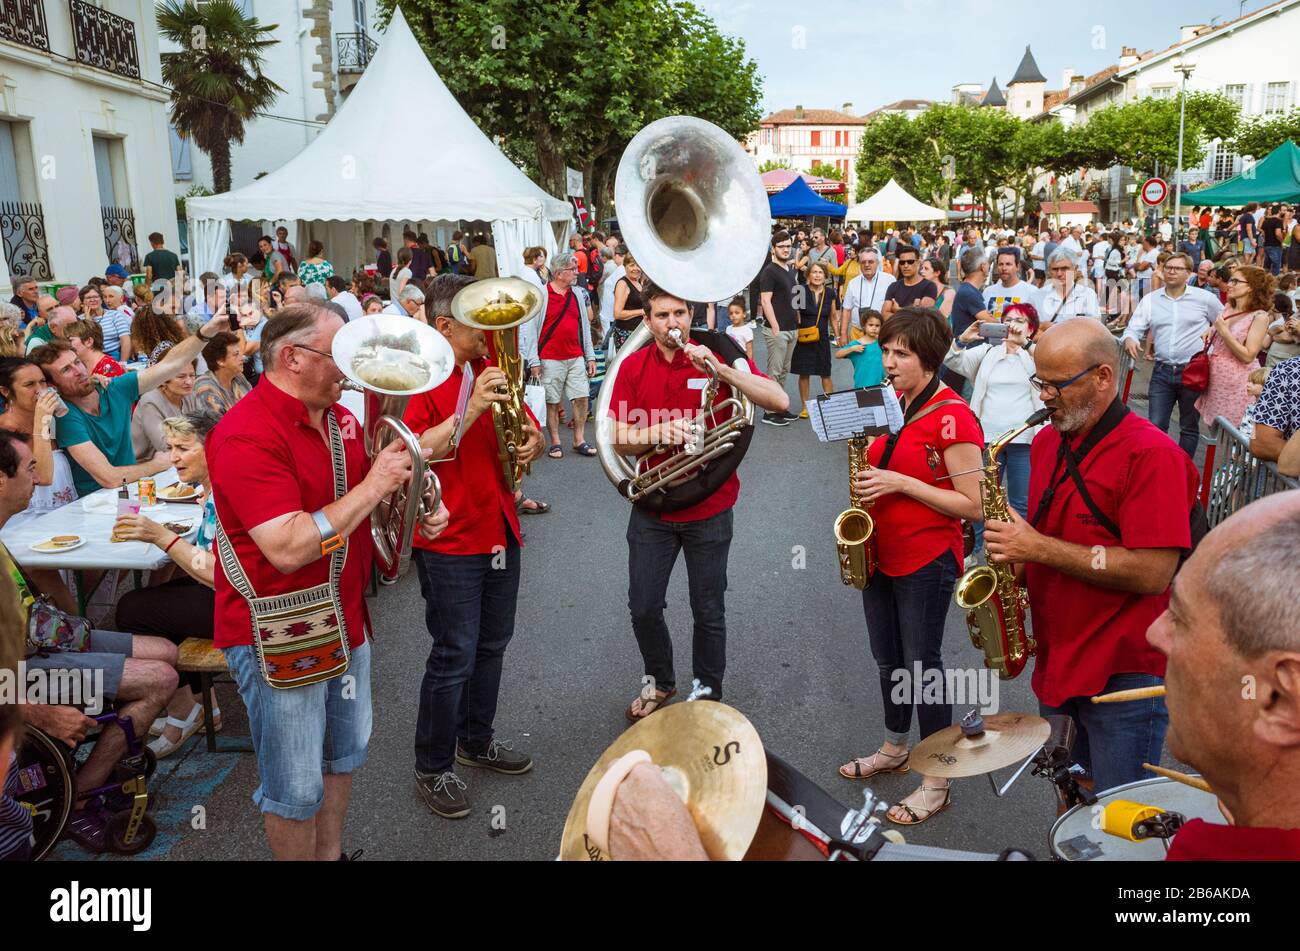 Saint Jean de Luz, French Basque Country, France - July 13th, 2019 : A traditional troupe of musicians perform at Place Louis XIV during the celebrati Stock Photo